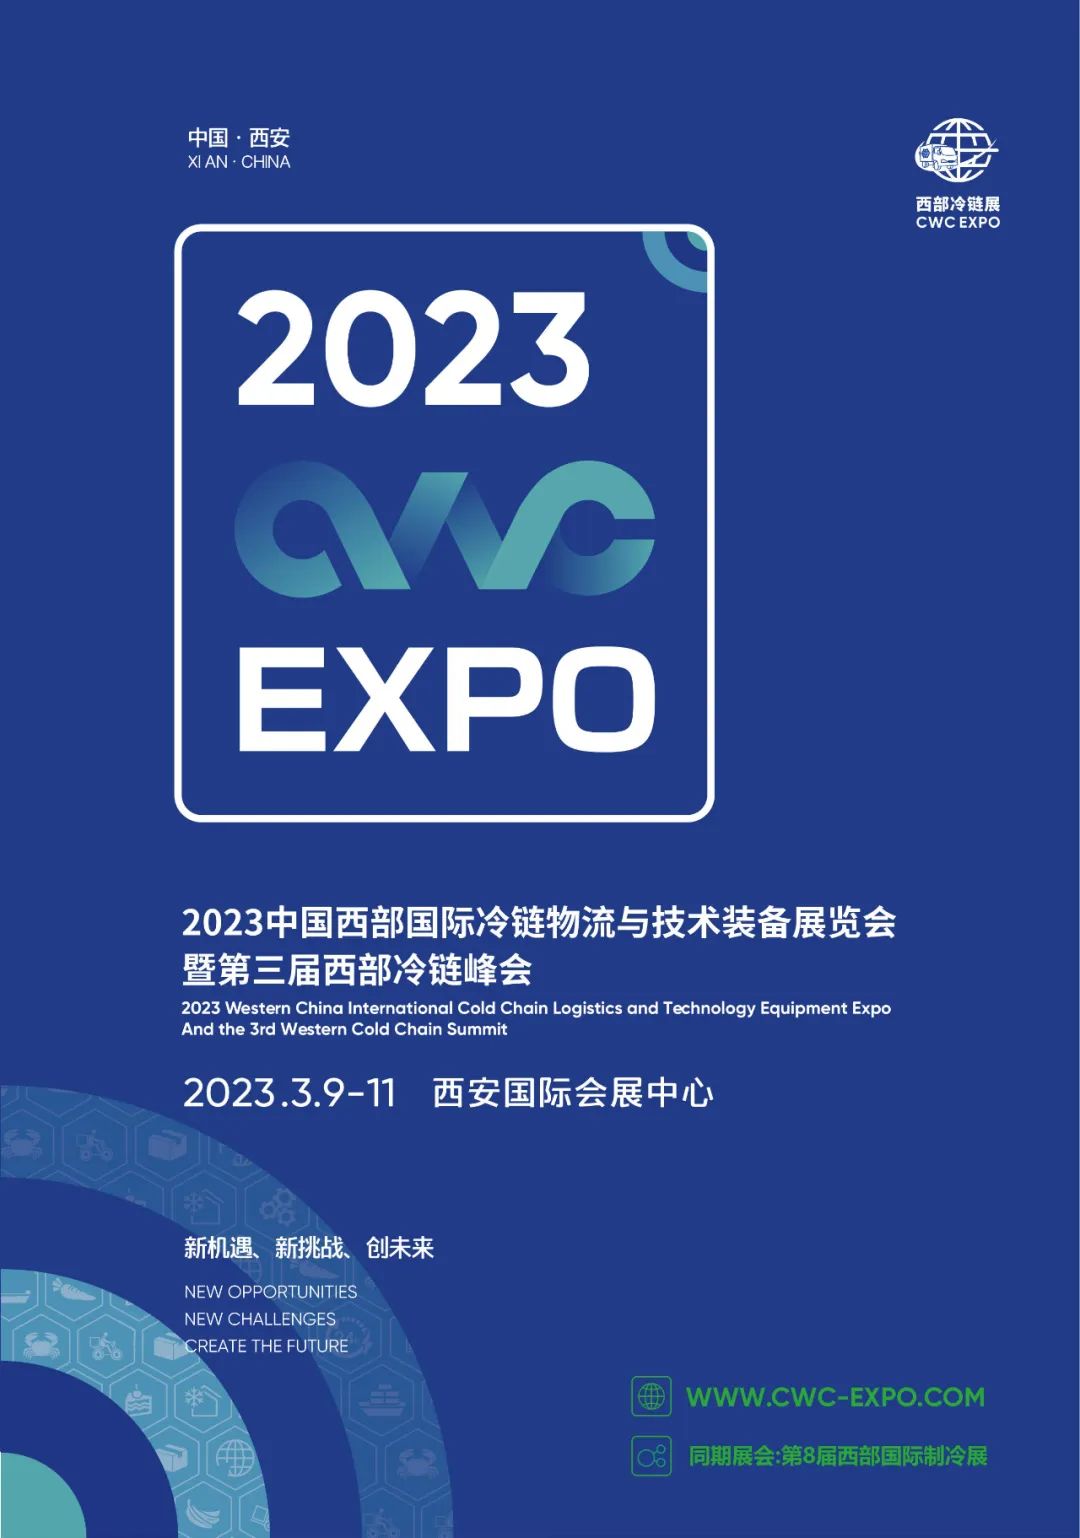 ​2023 Western China International Cold Chain Logistics and Technology Equipment ExpoAnd the 3rd Western Cold Chain Summit